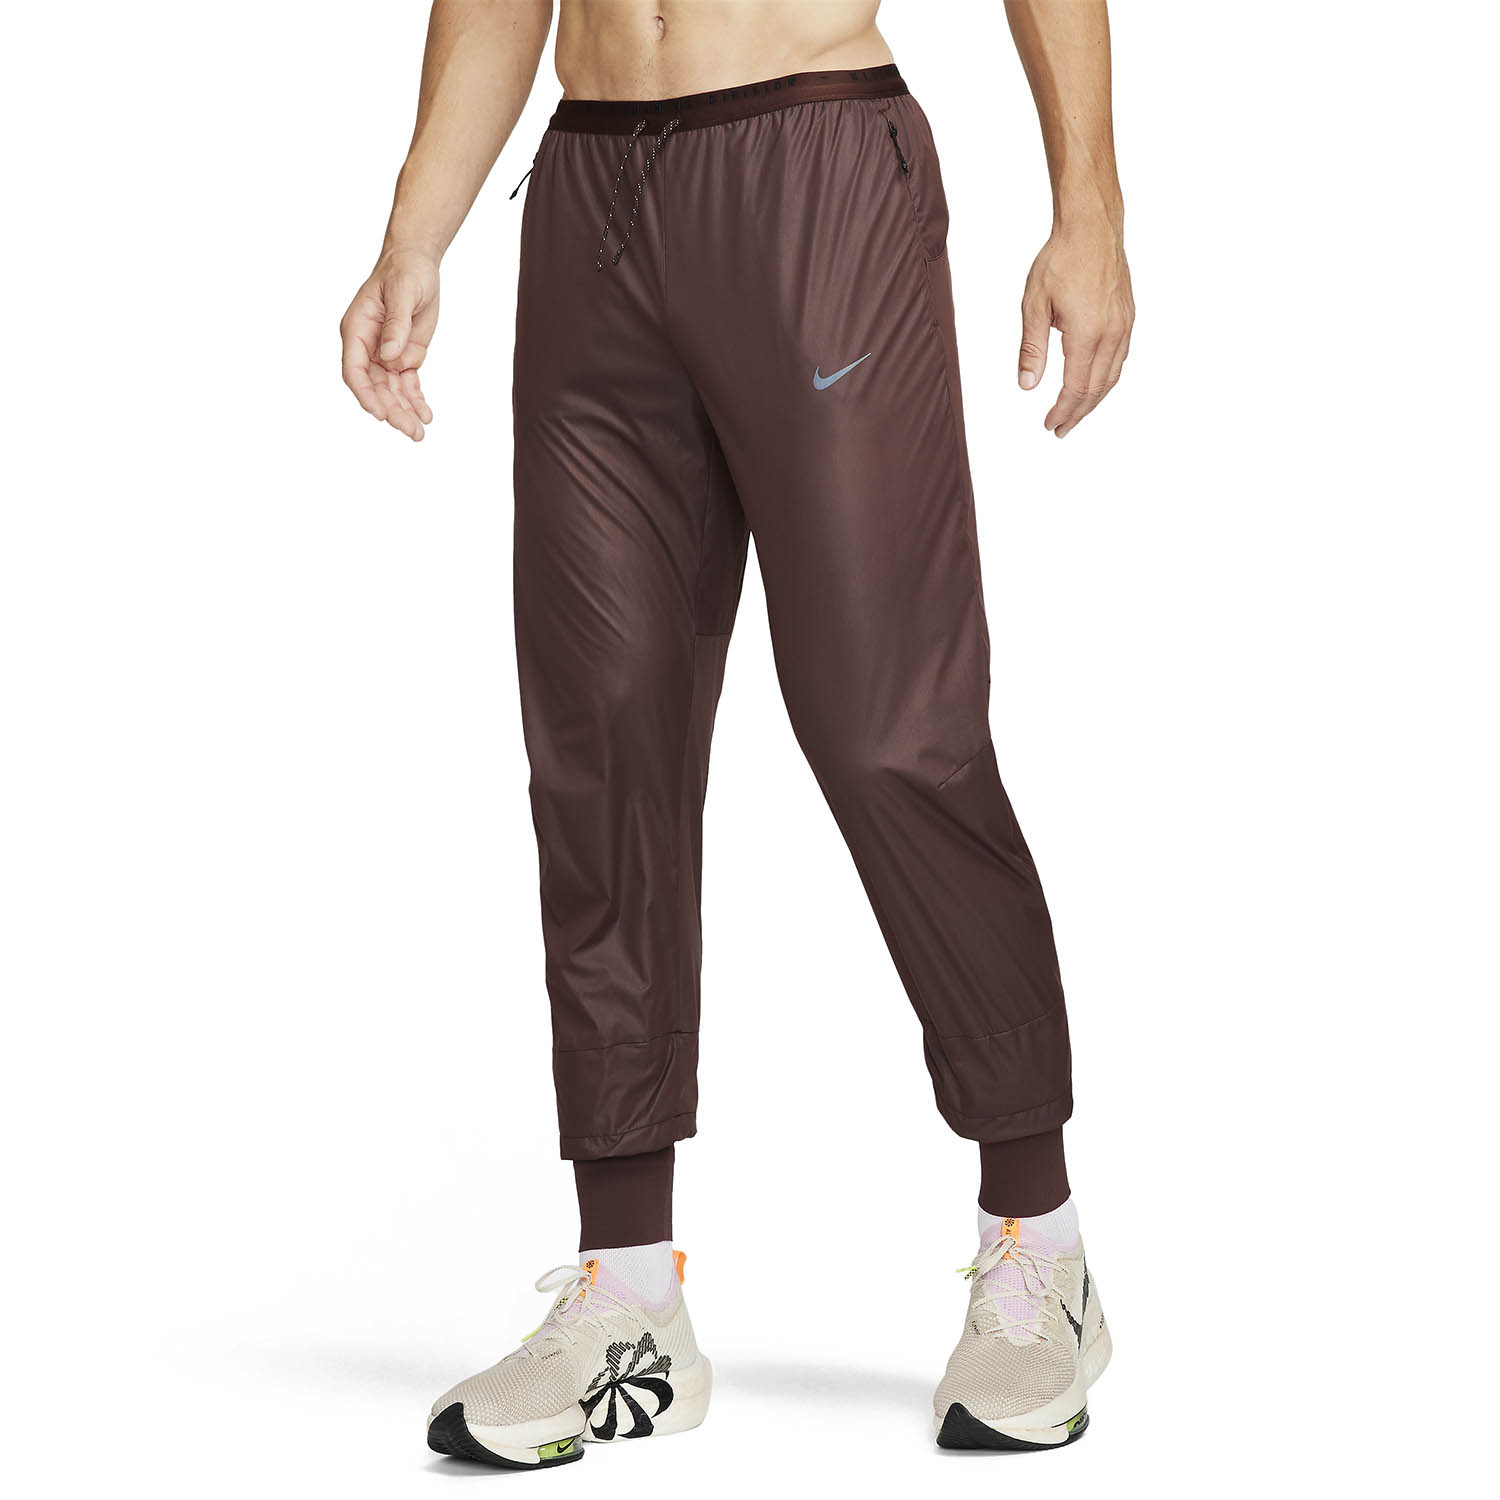 Nike Storm-FIT Run Division Phenom Pants - Earth/Black Reflective